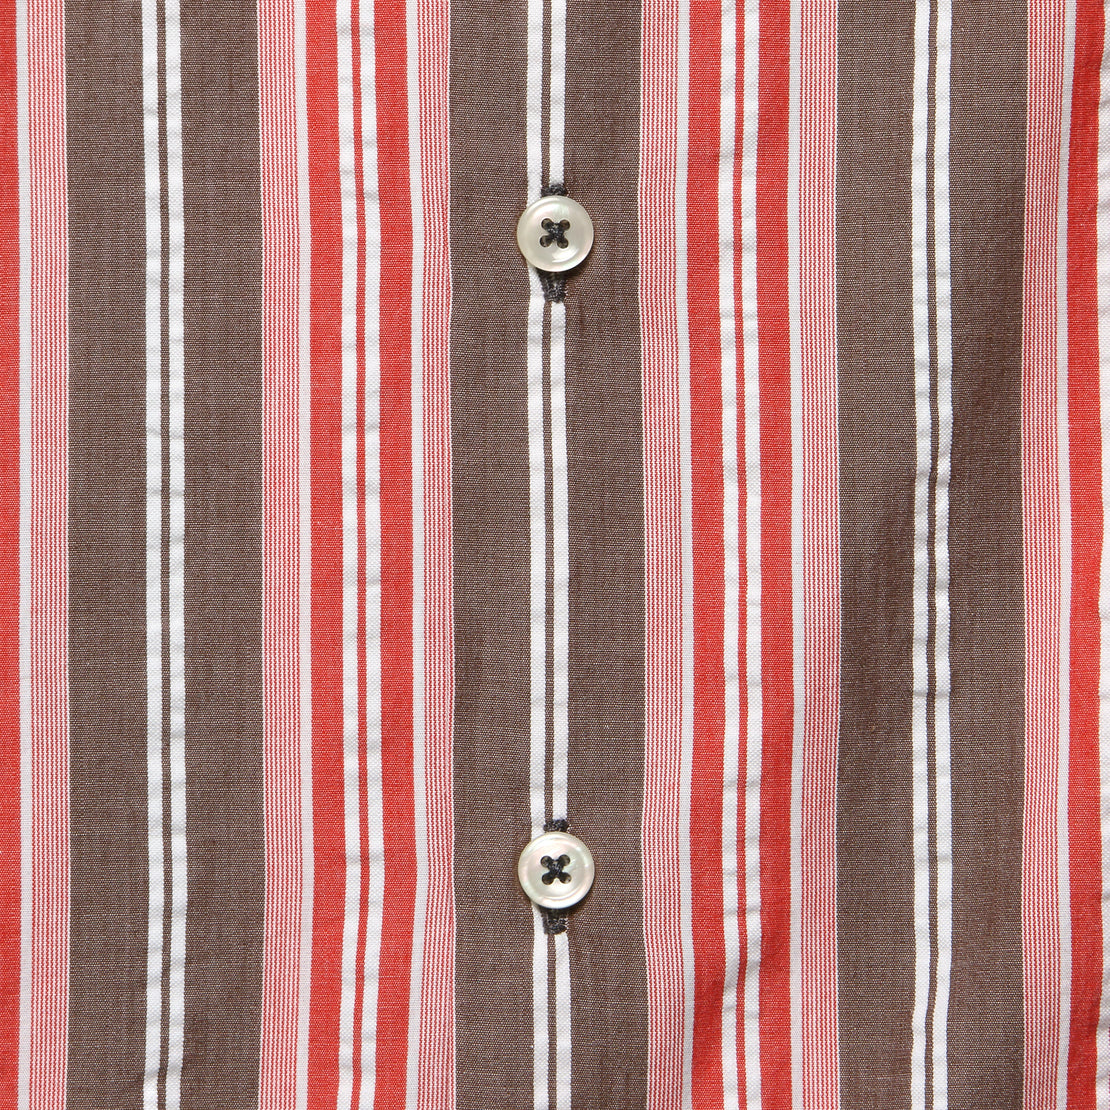 Nassau Stripe Camp Shirt - Red/Brown - Universal Works - STAG Provisions - Tops - S/S Woven - Stripe